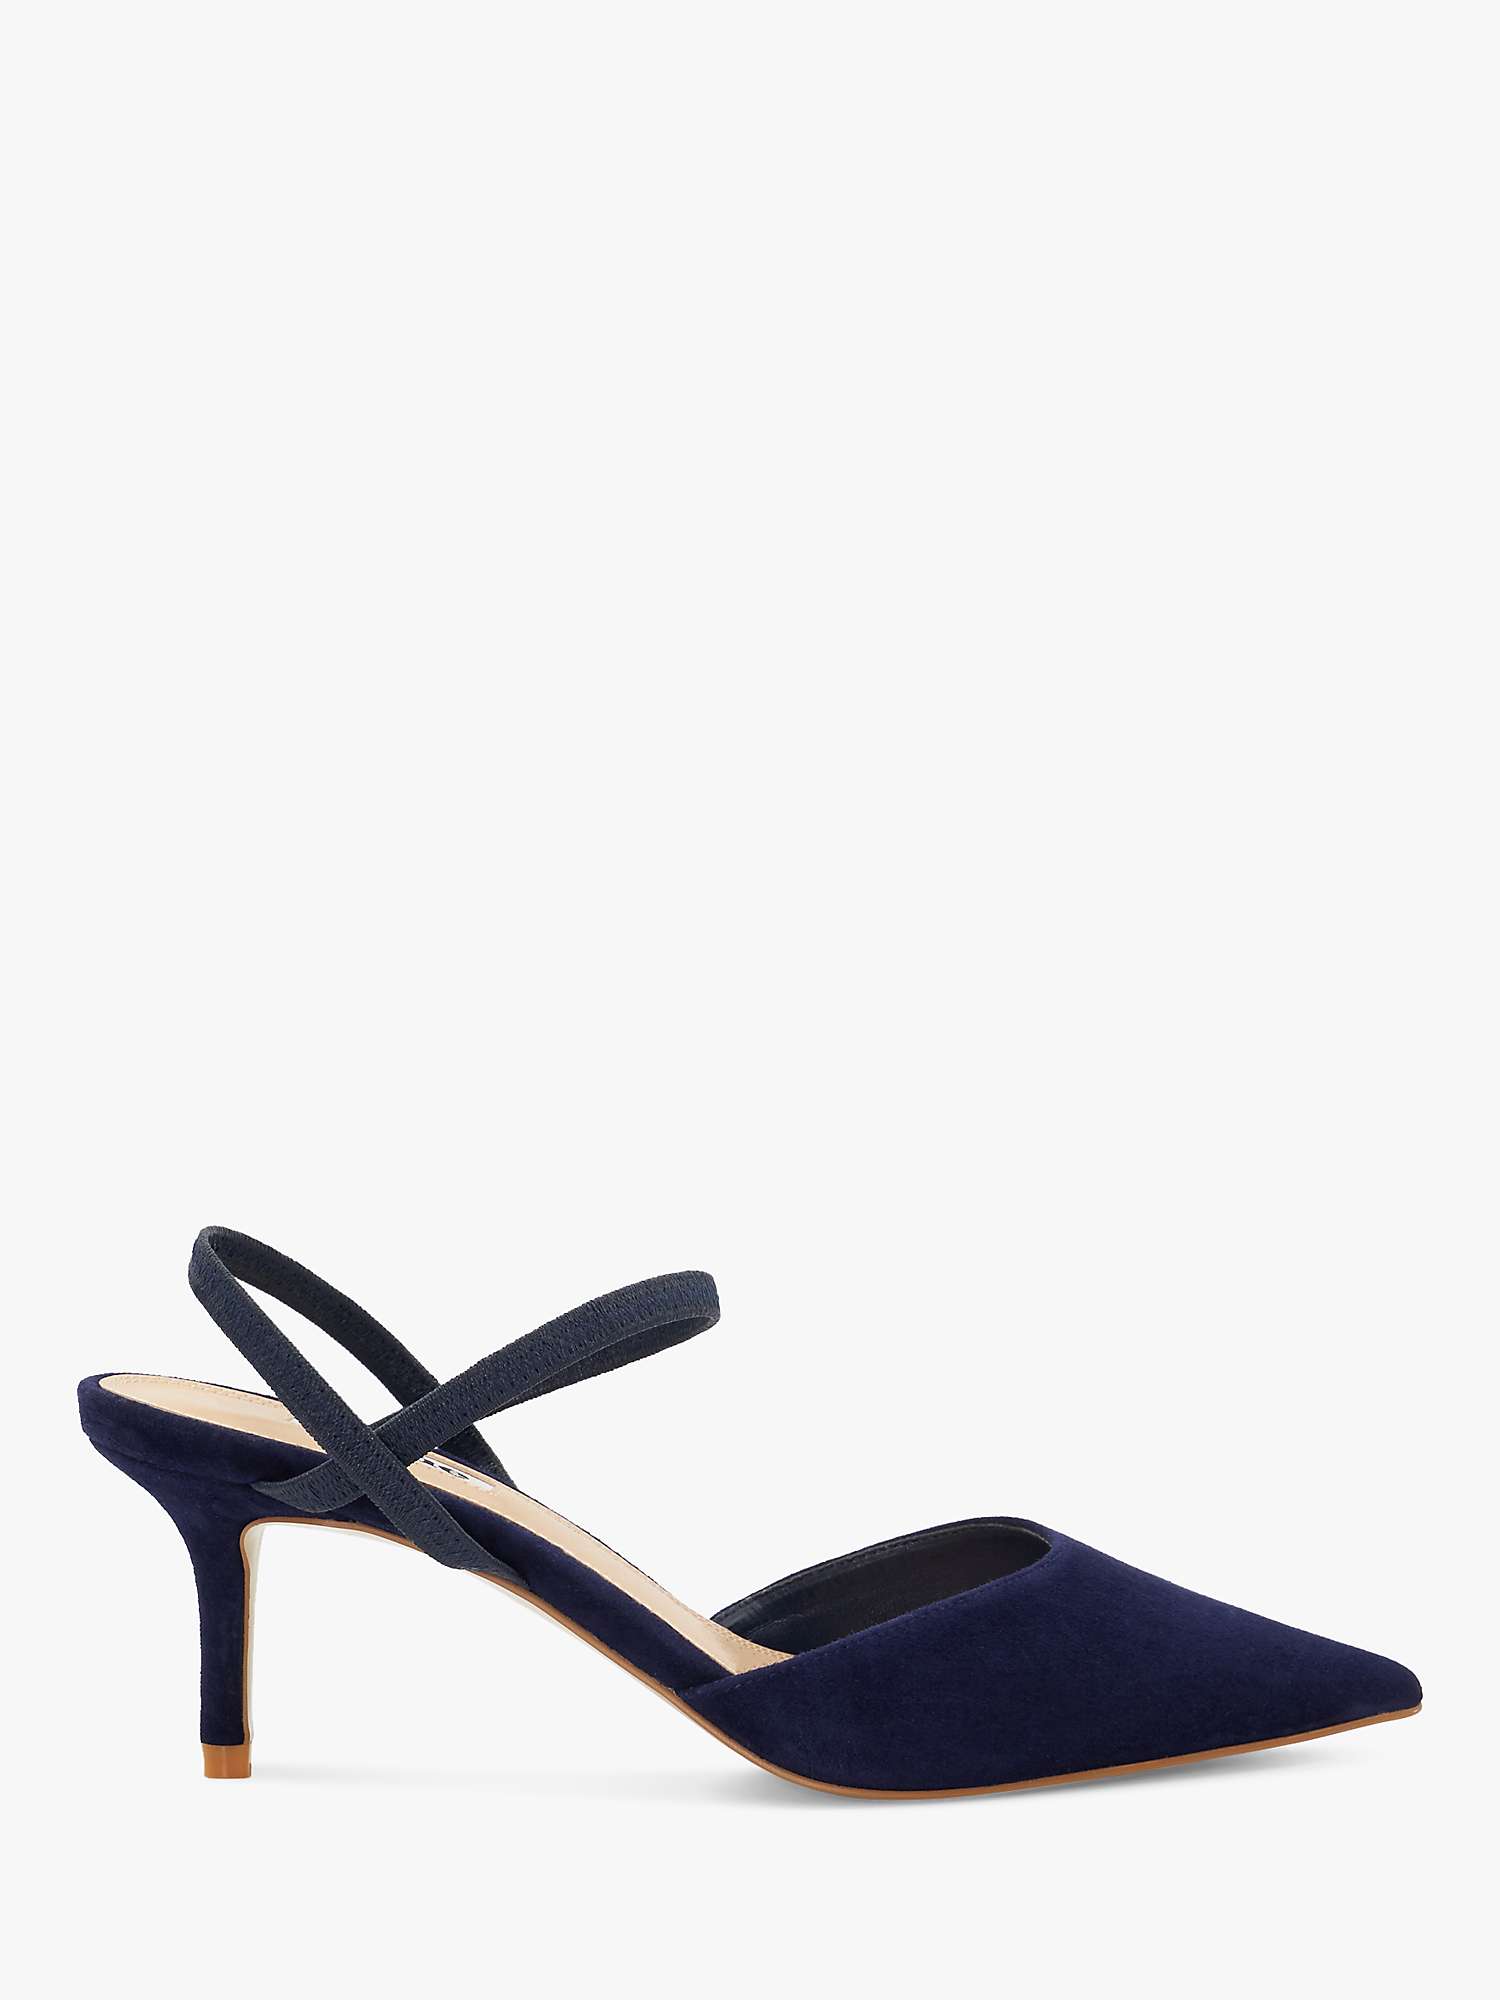 Buy Dune Wide Fit Classical Suede Elasticated Open Court Shoes, Navy Online at johnlewis.com